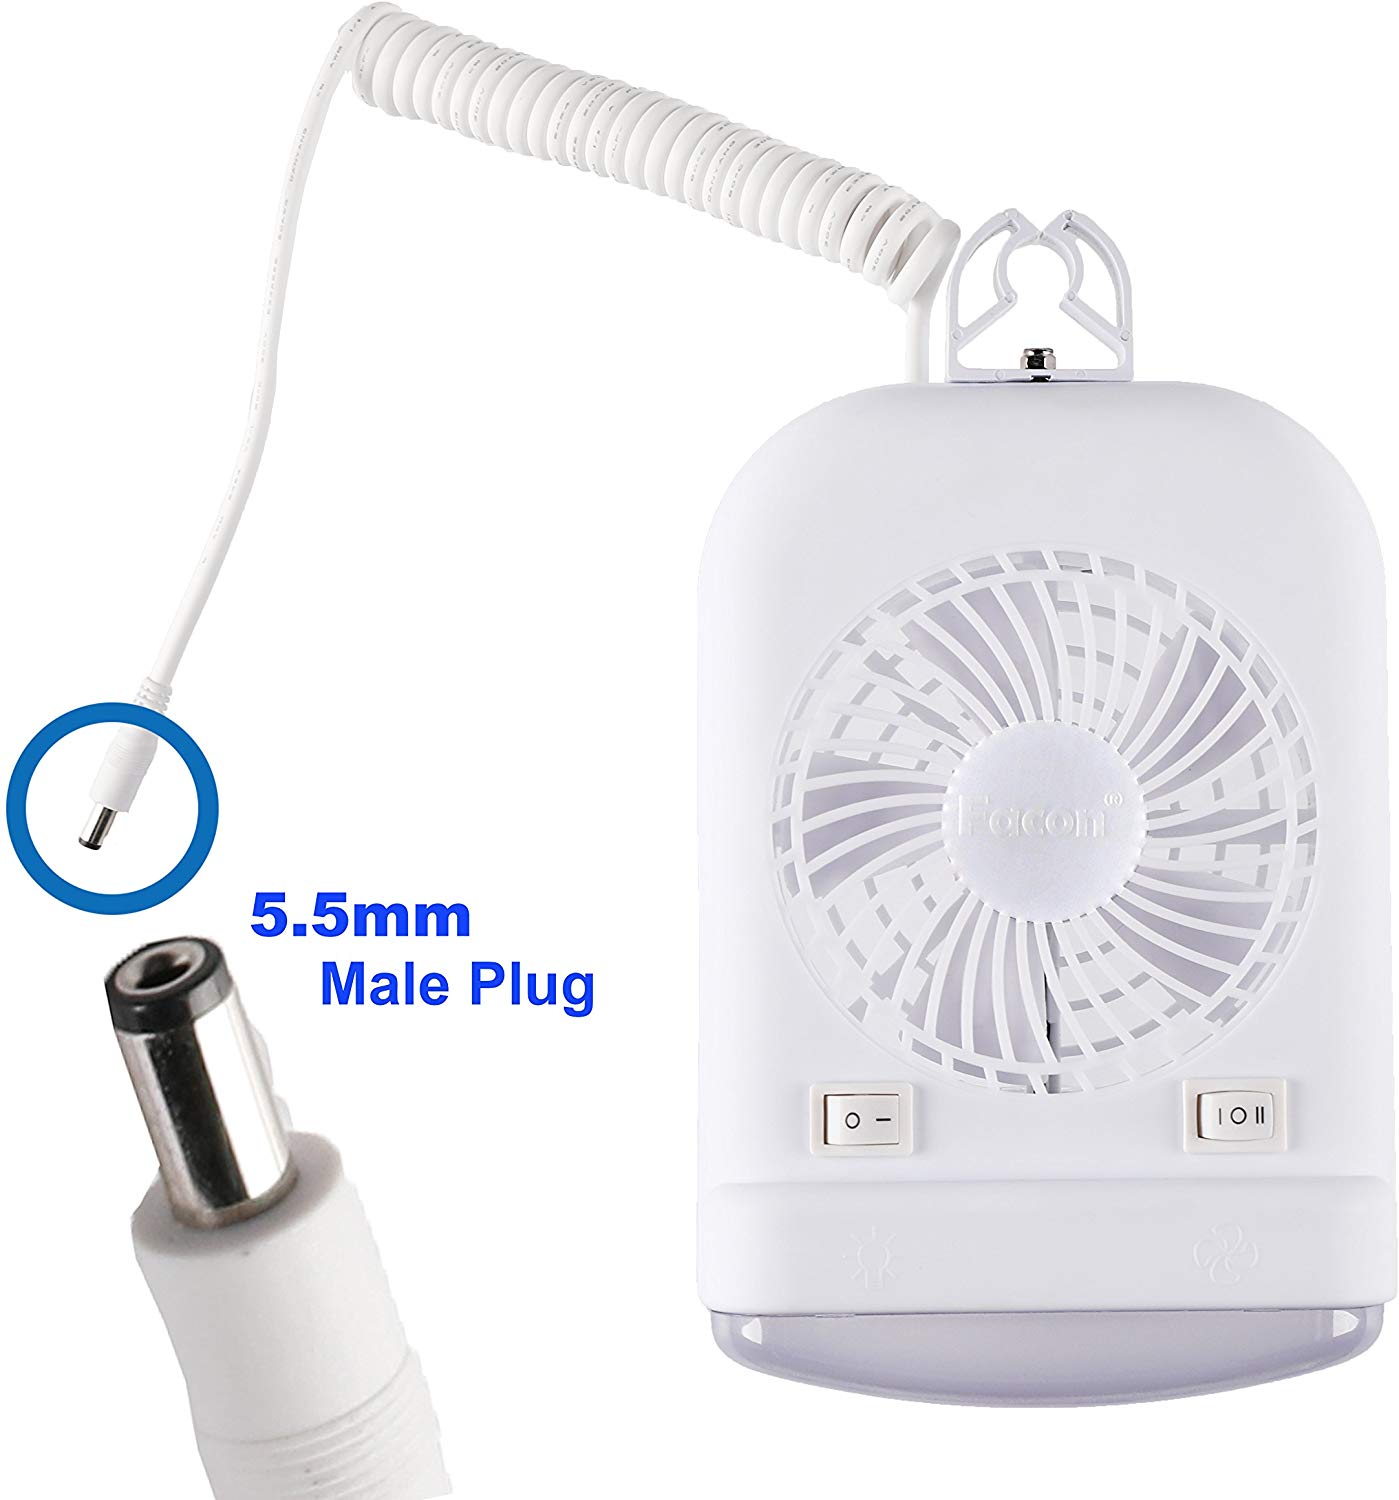 12 Volt LED Light and Fan with On/Off Switch for Pop-up Tent Campers.